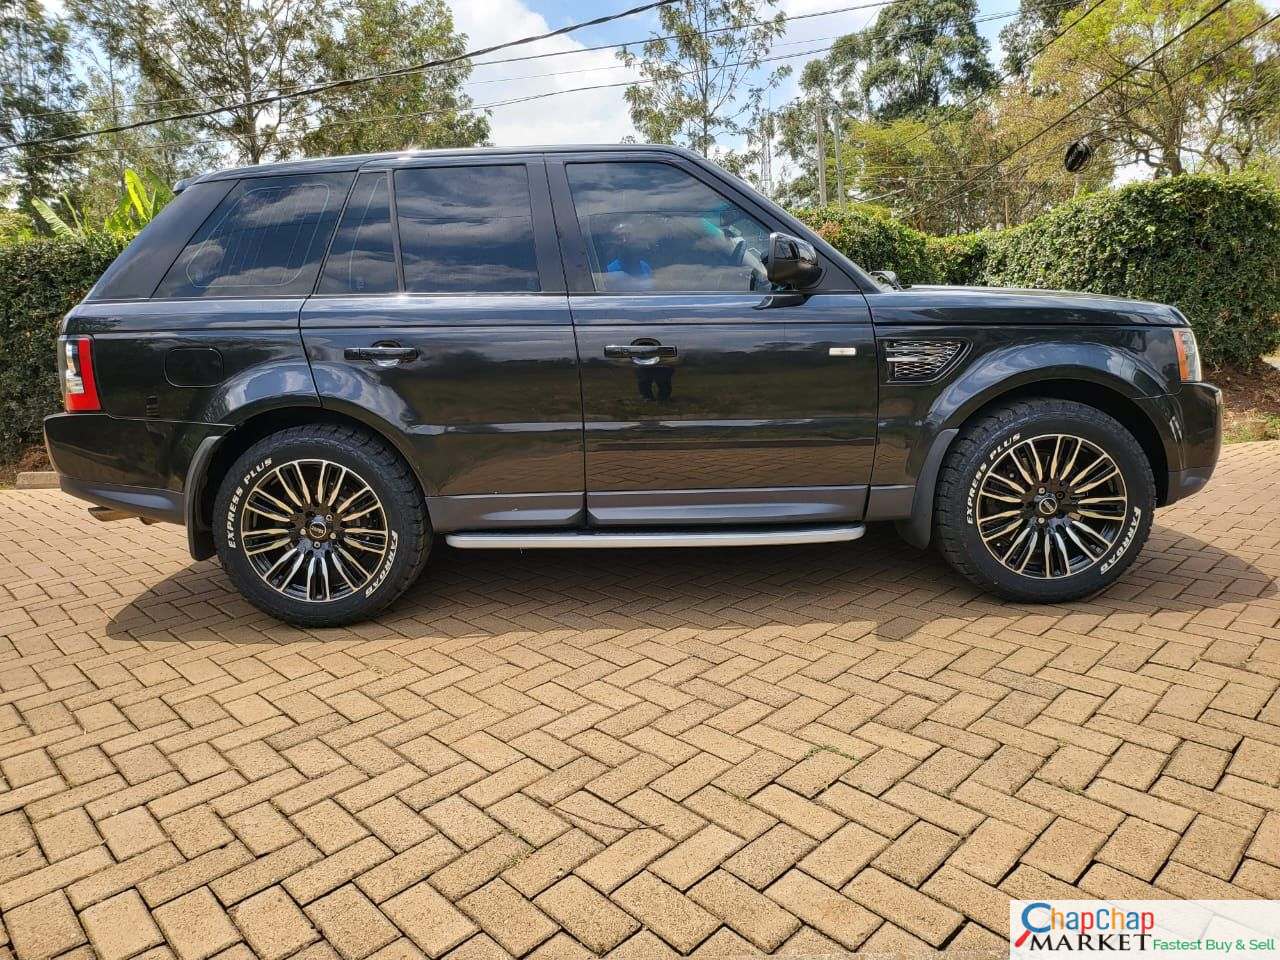 Cars Cars For Sale-Range Rover Sport for sale in kenya hire purchase installments You pay 30% deposit Trade in OK EXCLUSIVE 9